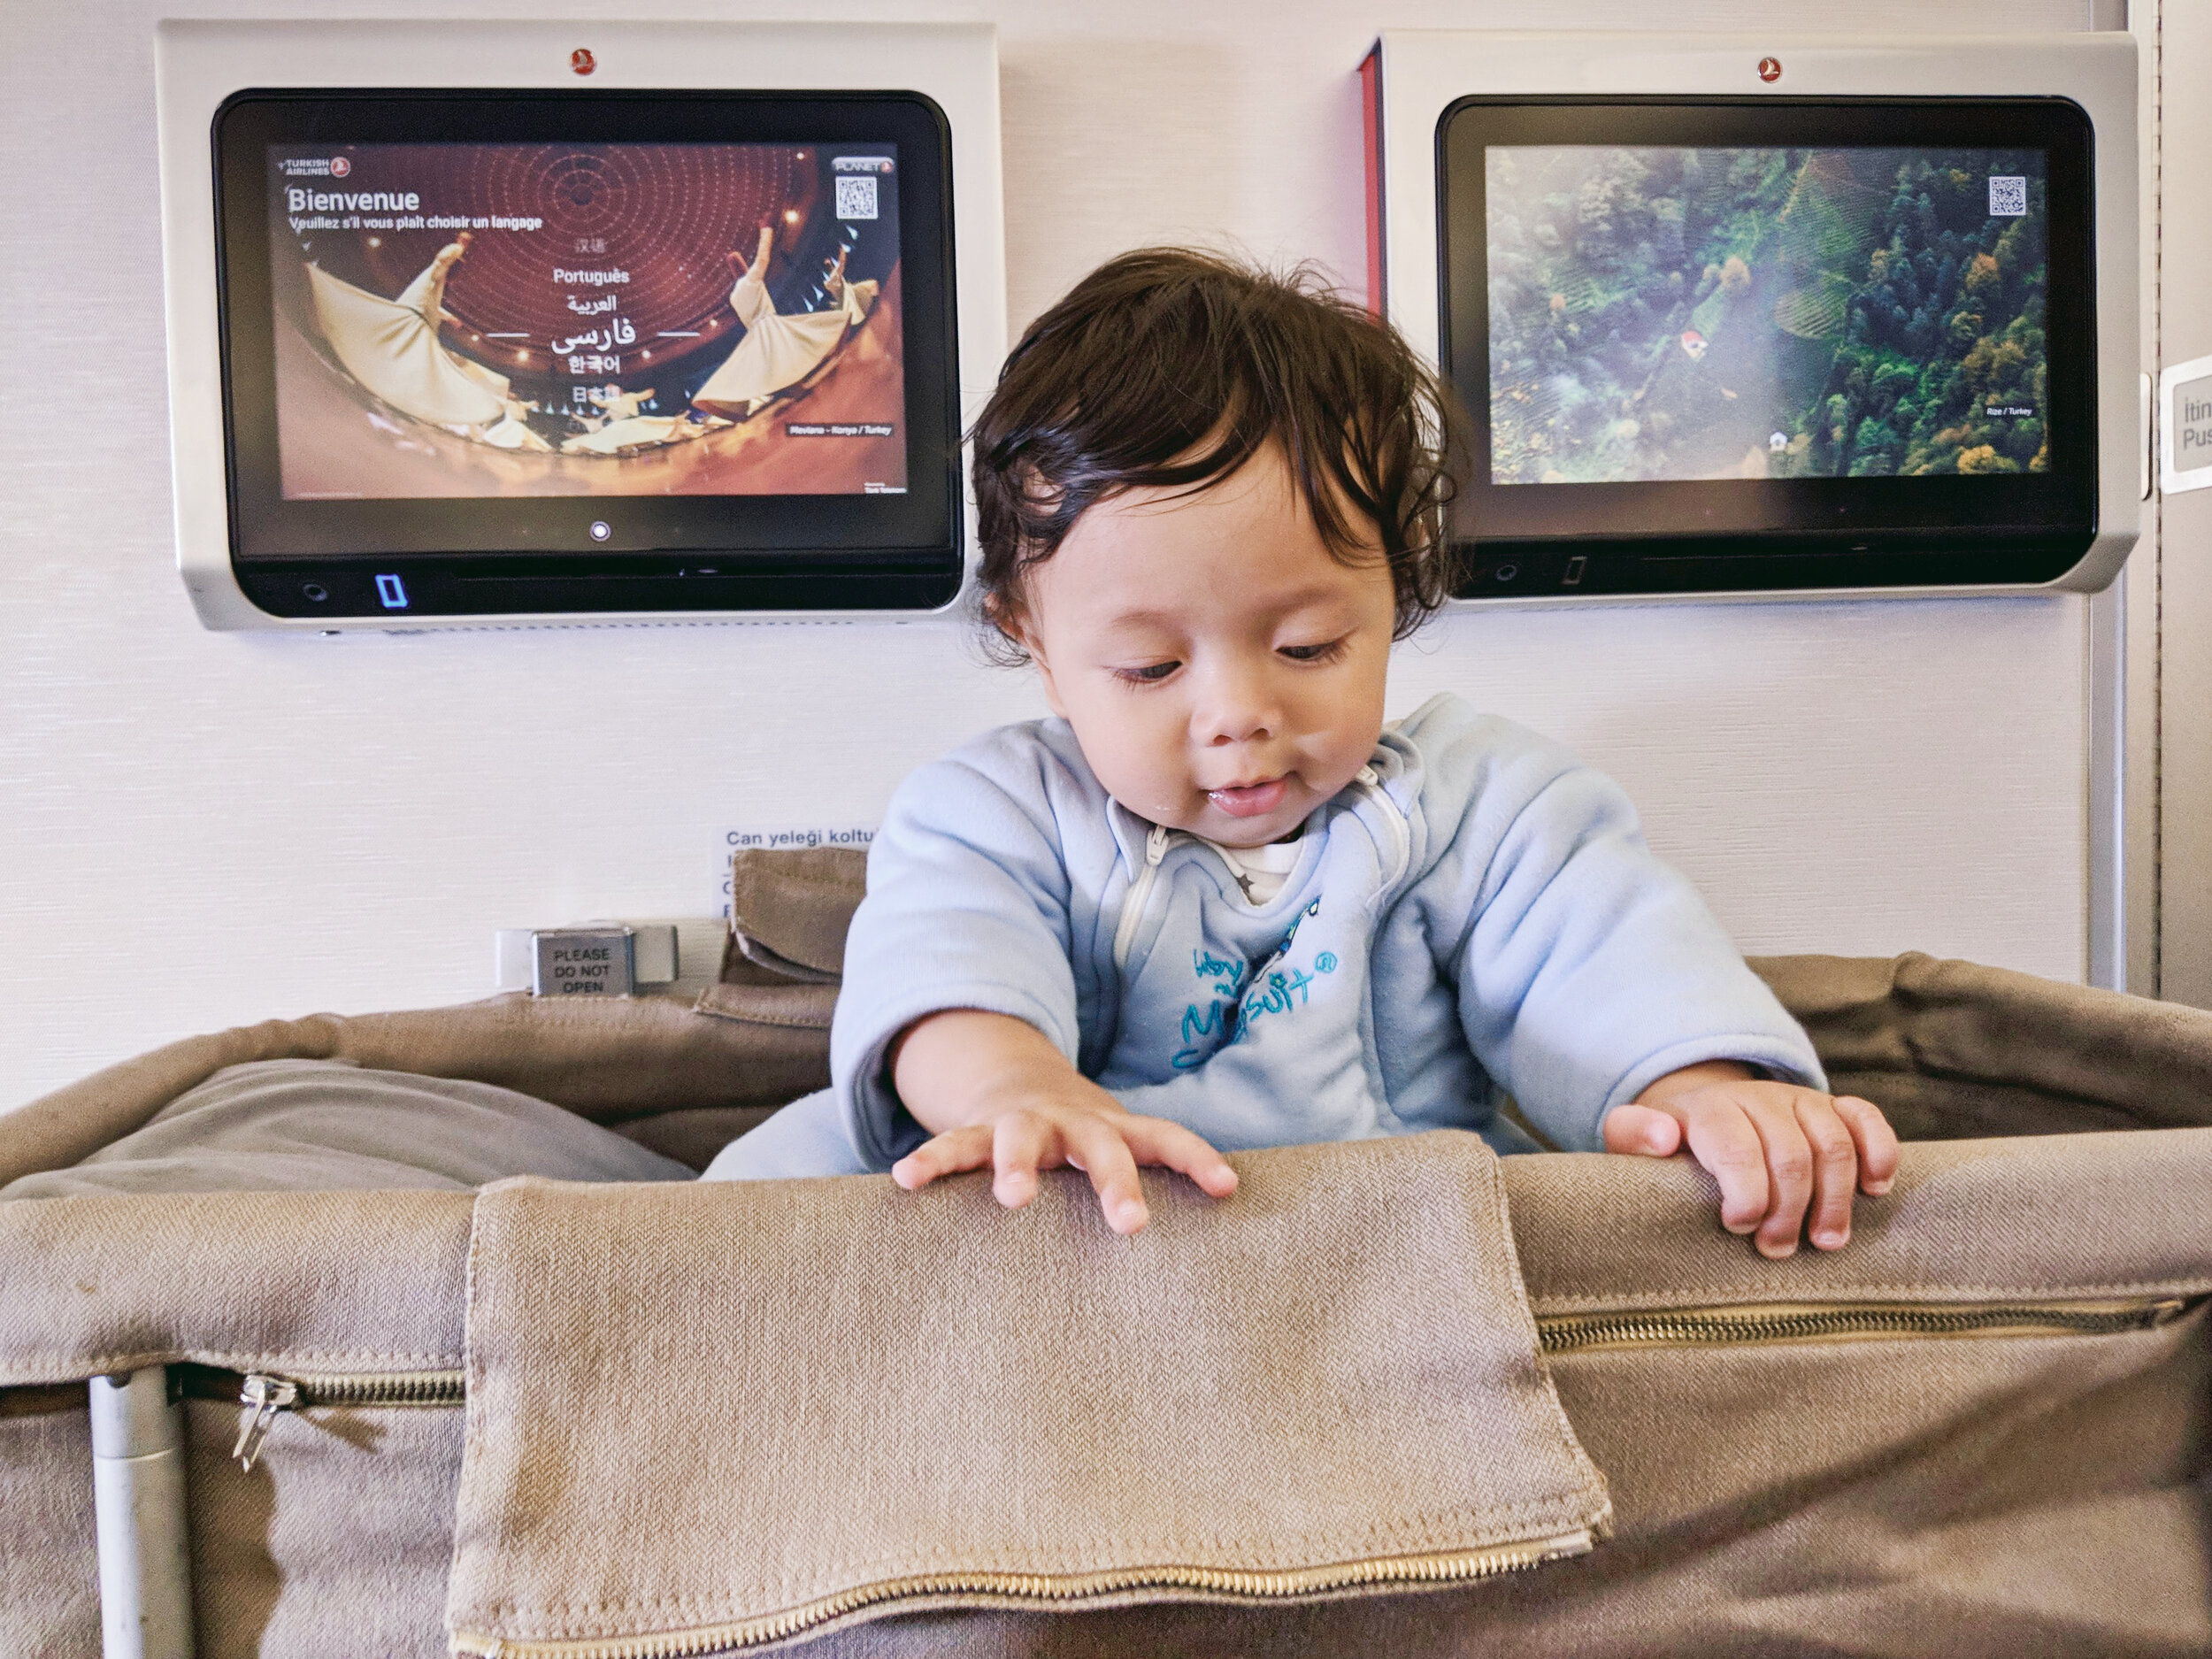  Orlo (6 months old) sitting in his baby bassinet on Turkish Airlines 